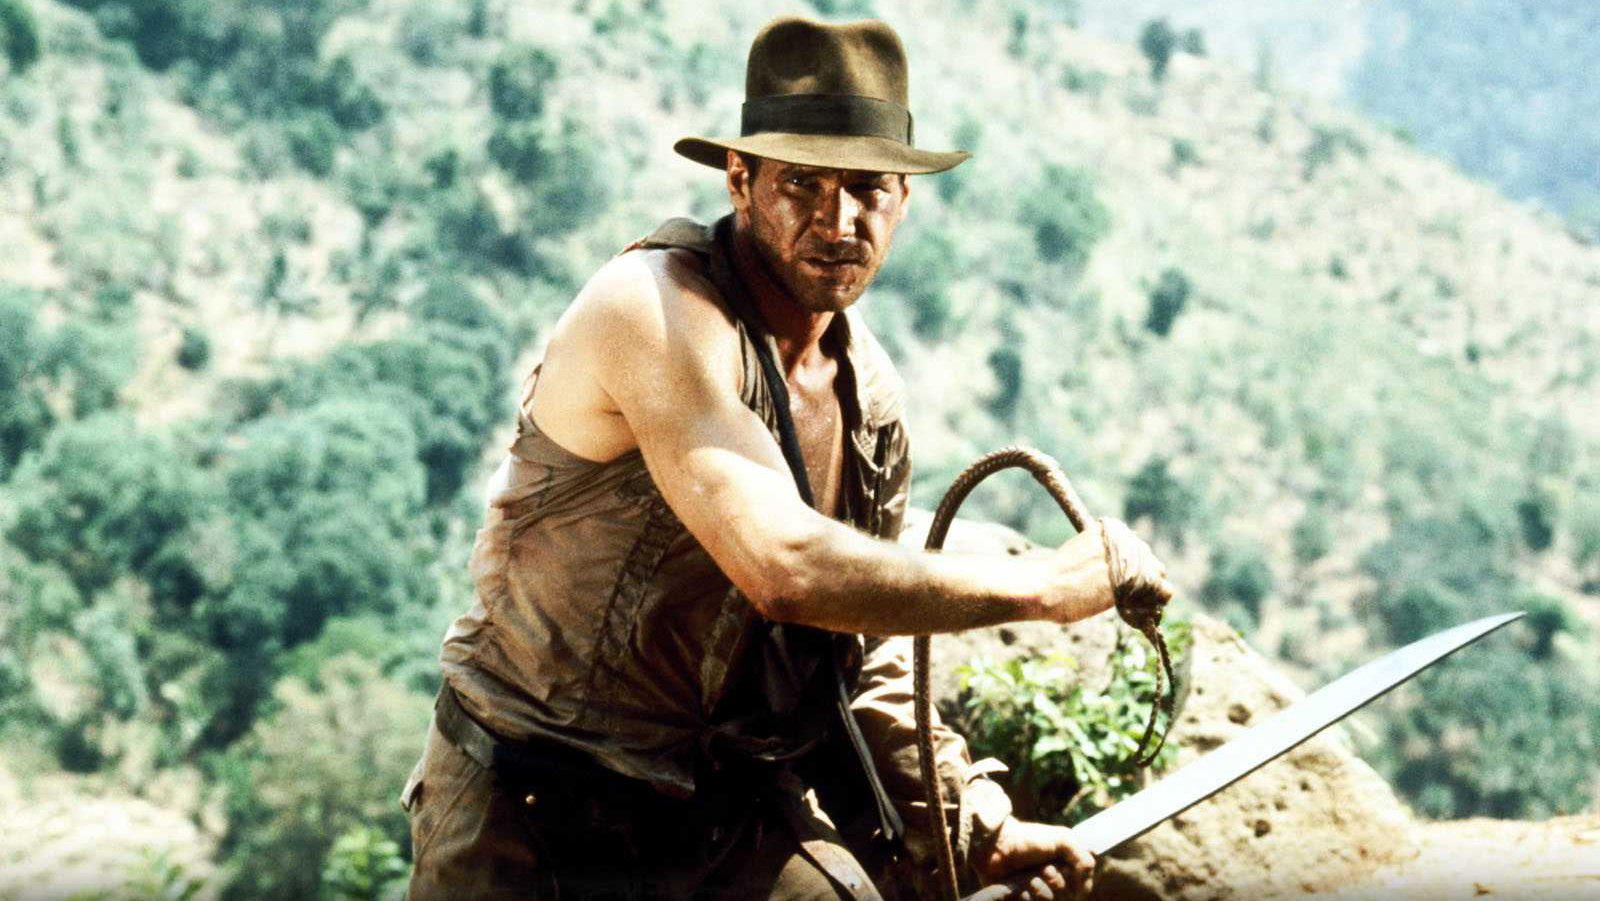 Indiana Jones Sequel May Be Coming Our Way!